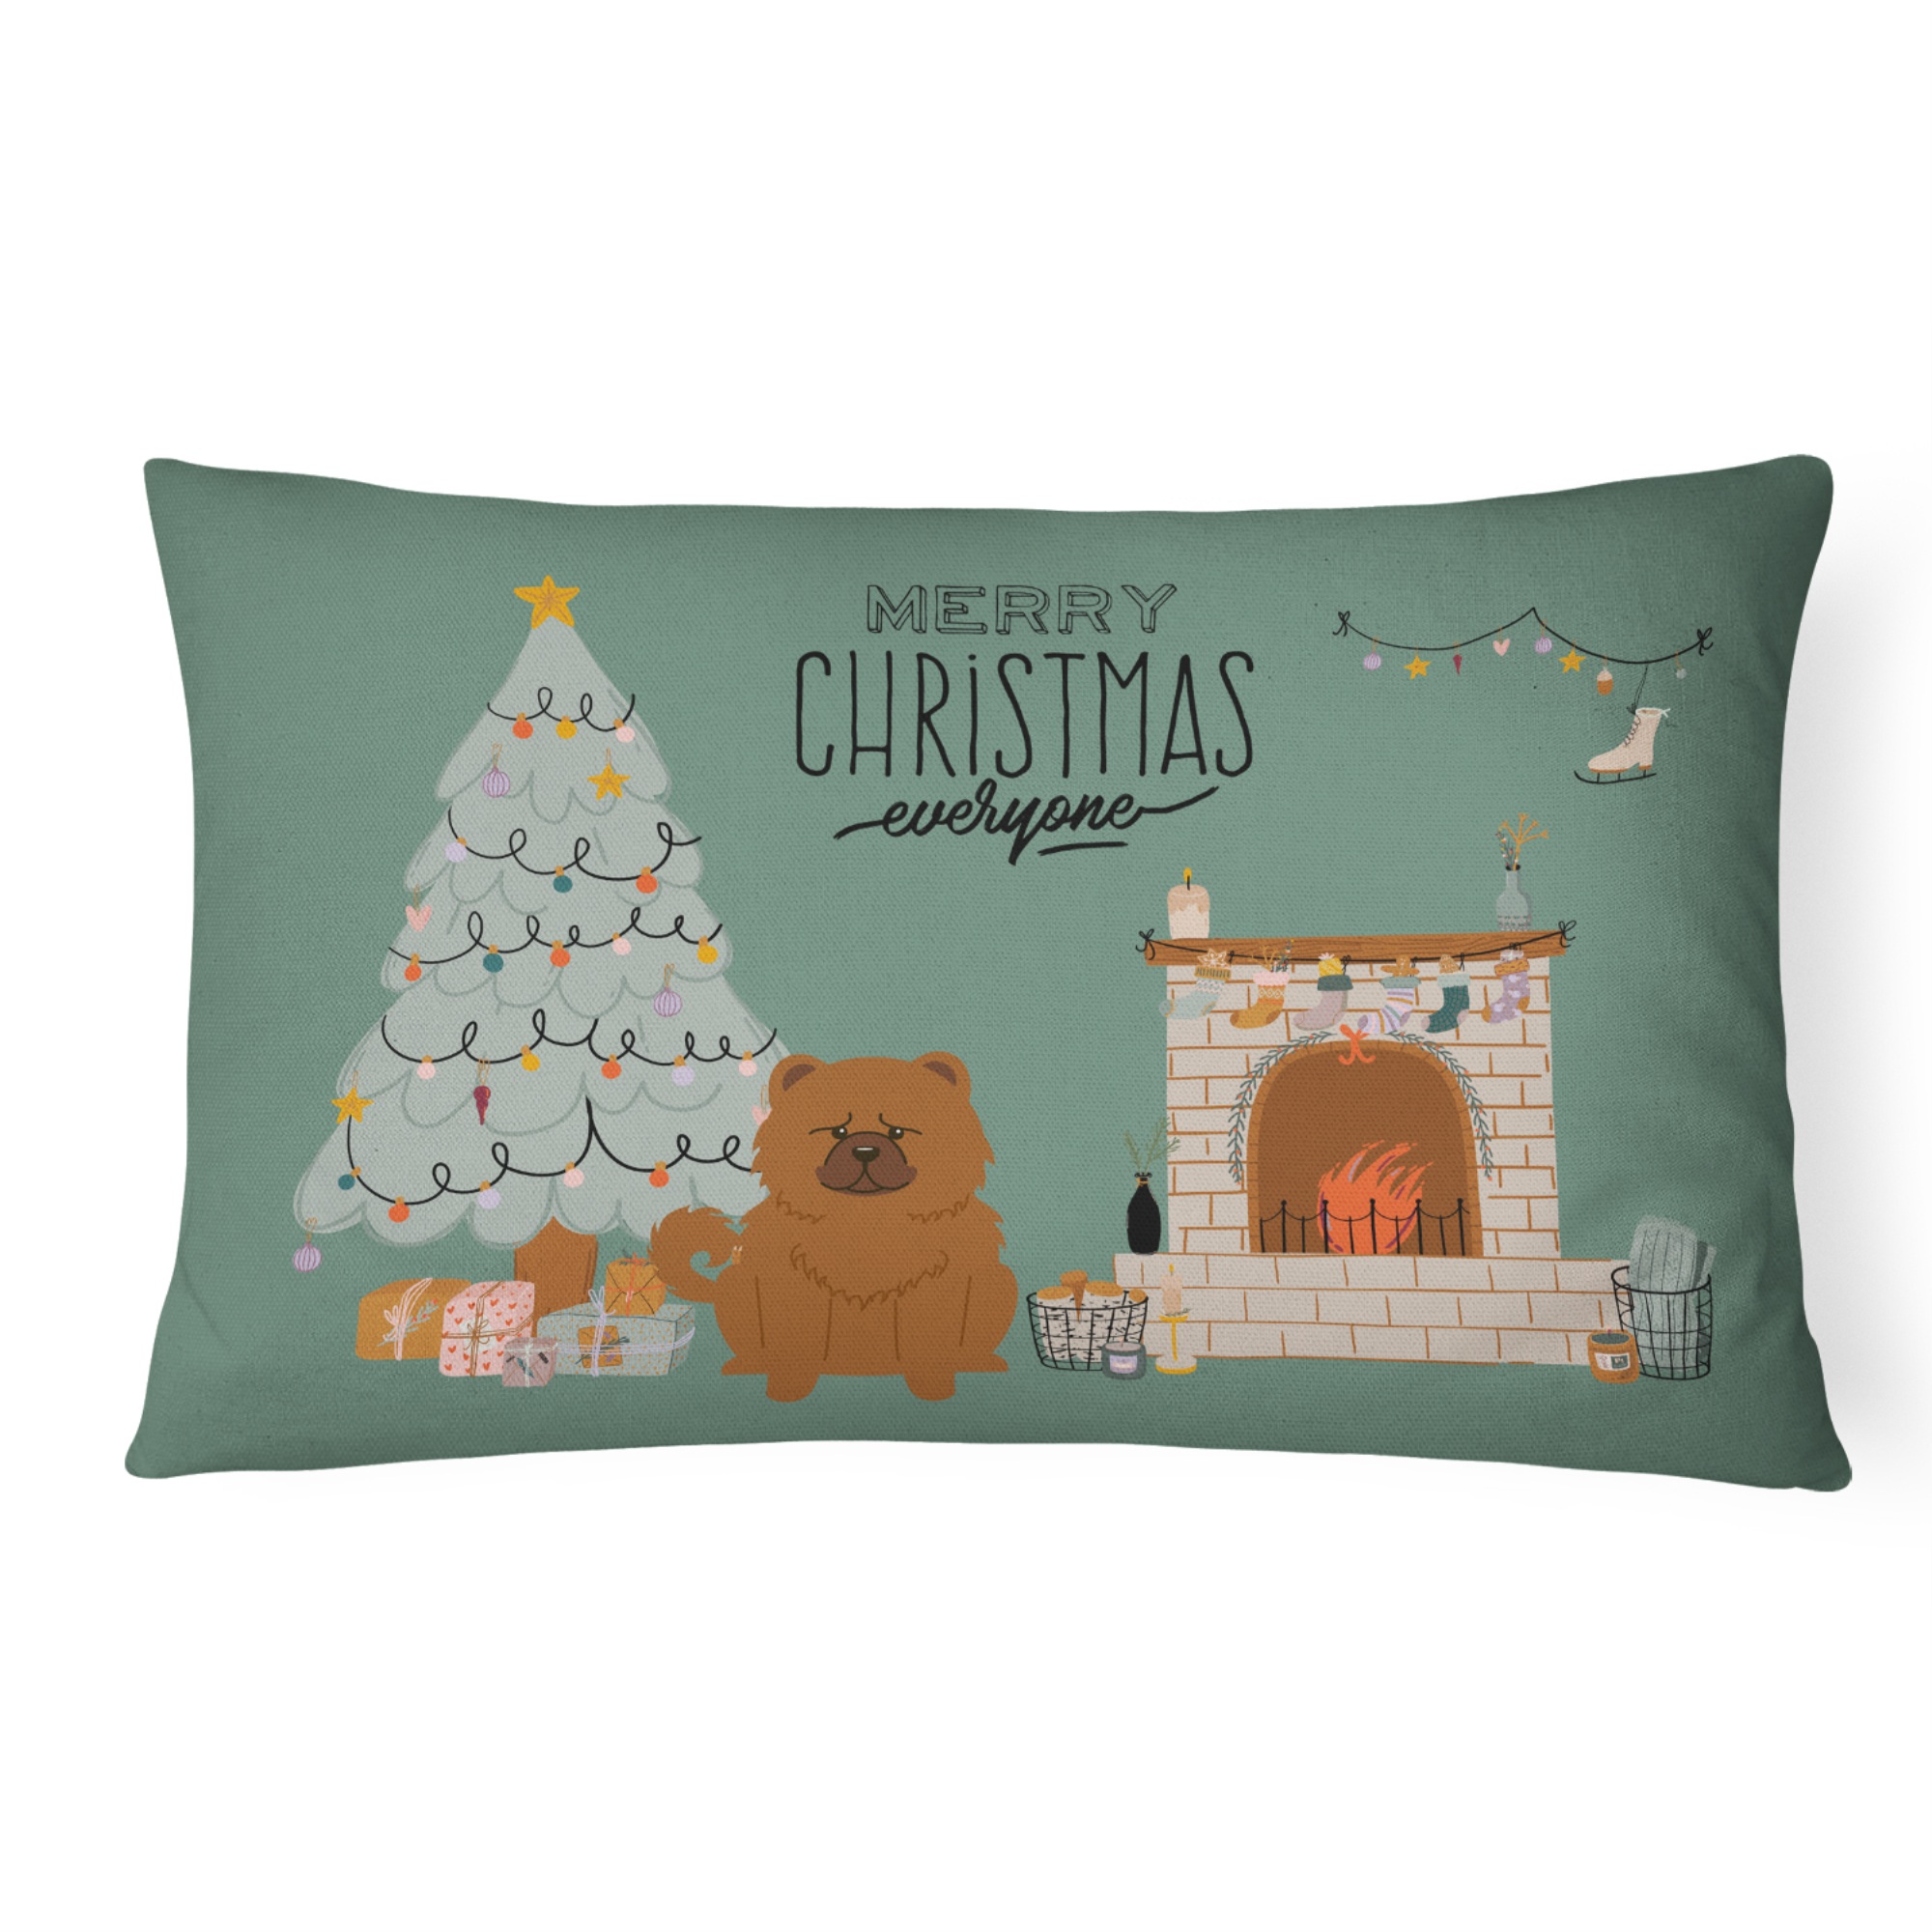 Caroline's Treasures CK7705PW1216 Red Chow Christmas Everyone Canvas Fabric Decorative Pillow Patio-Furniture-Pillows, Multicolor"